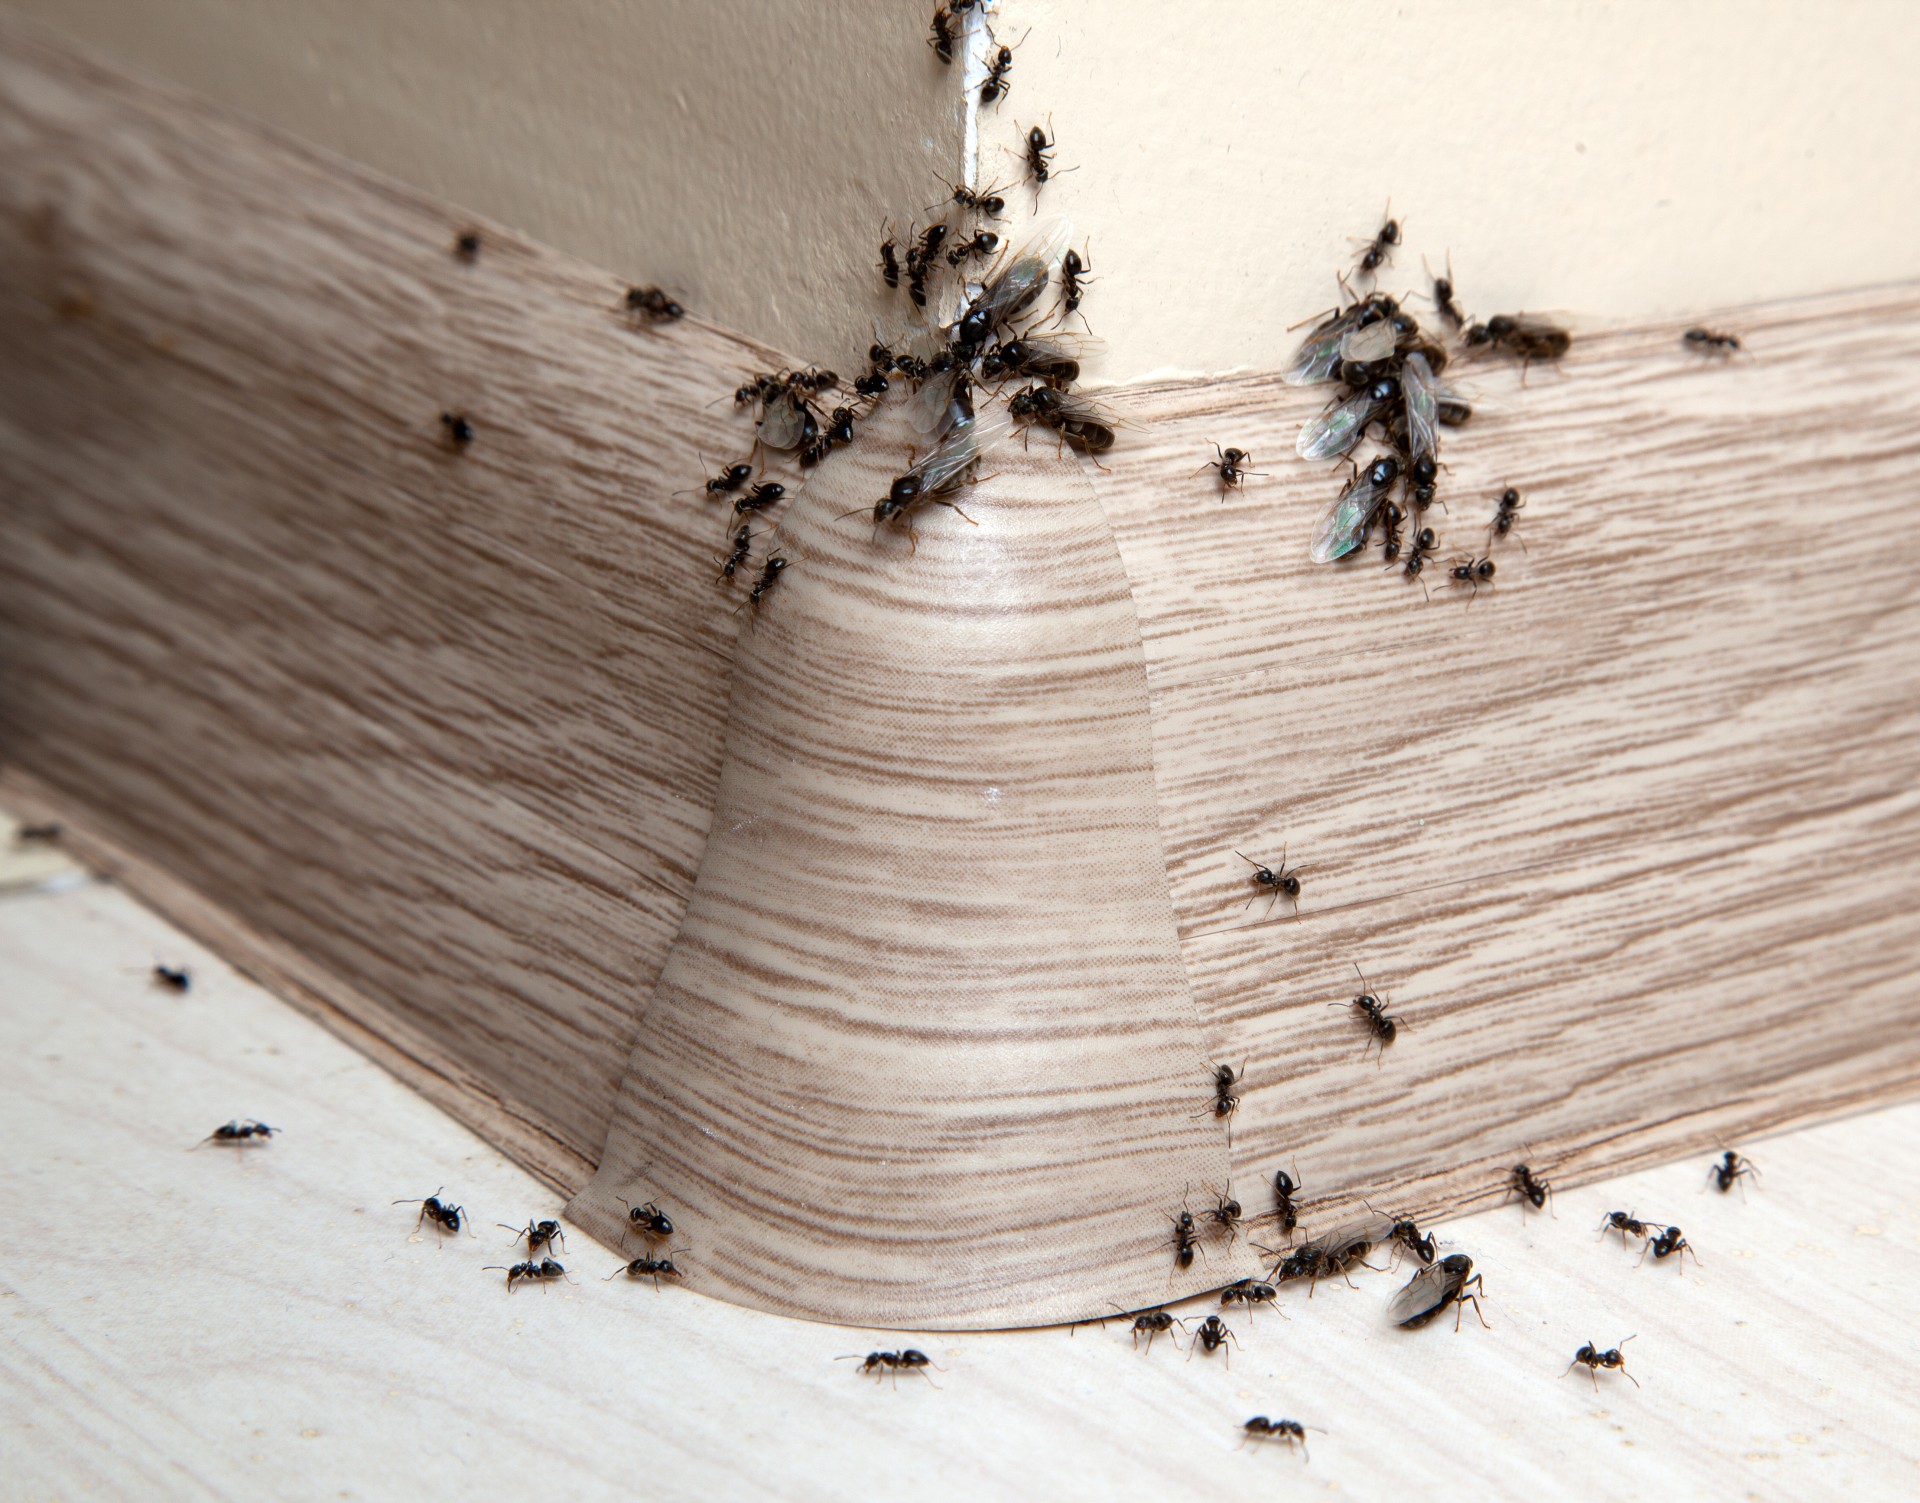 Ant Infestation, Pest Control in Tadworth, Kingswood, Mogador, KT20. Call Now 020 8166 9746